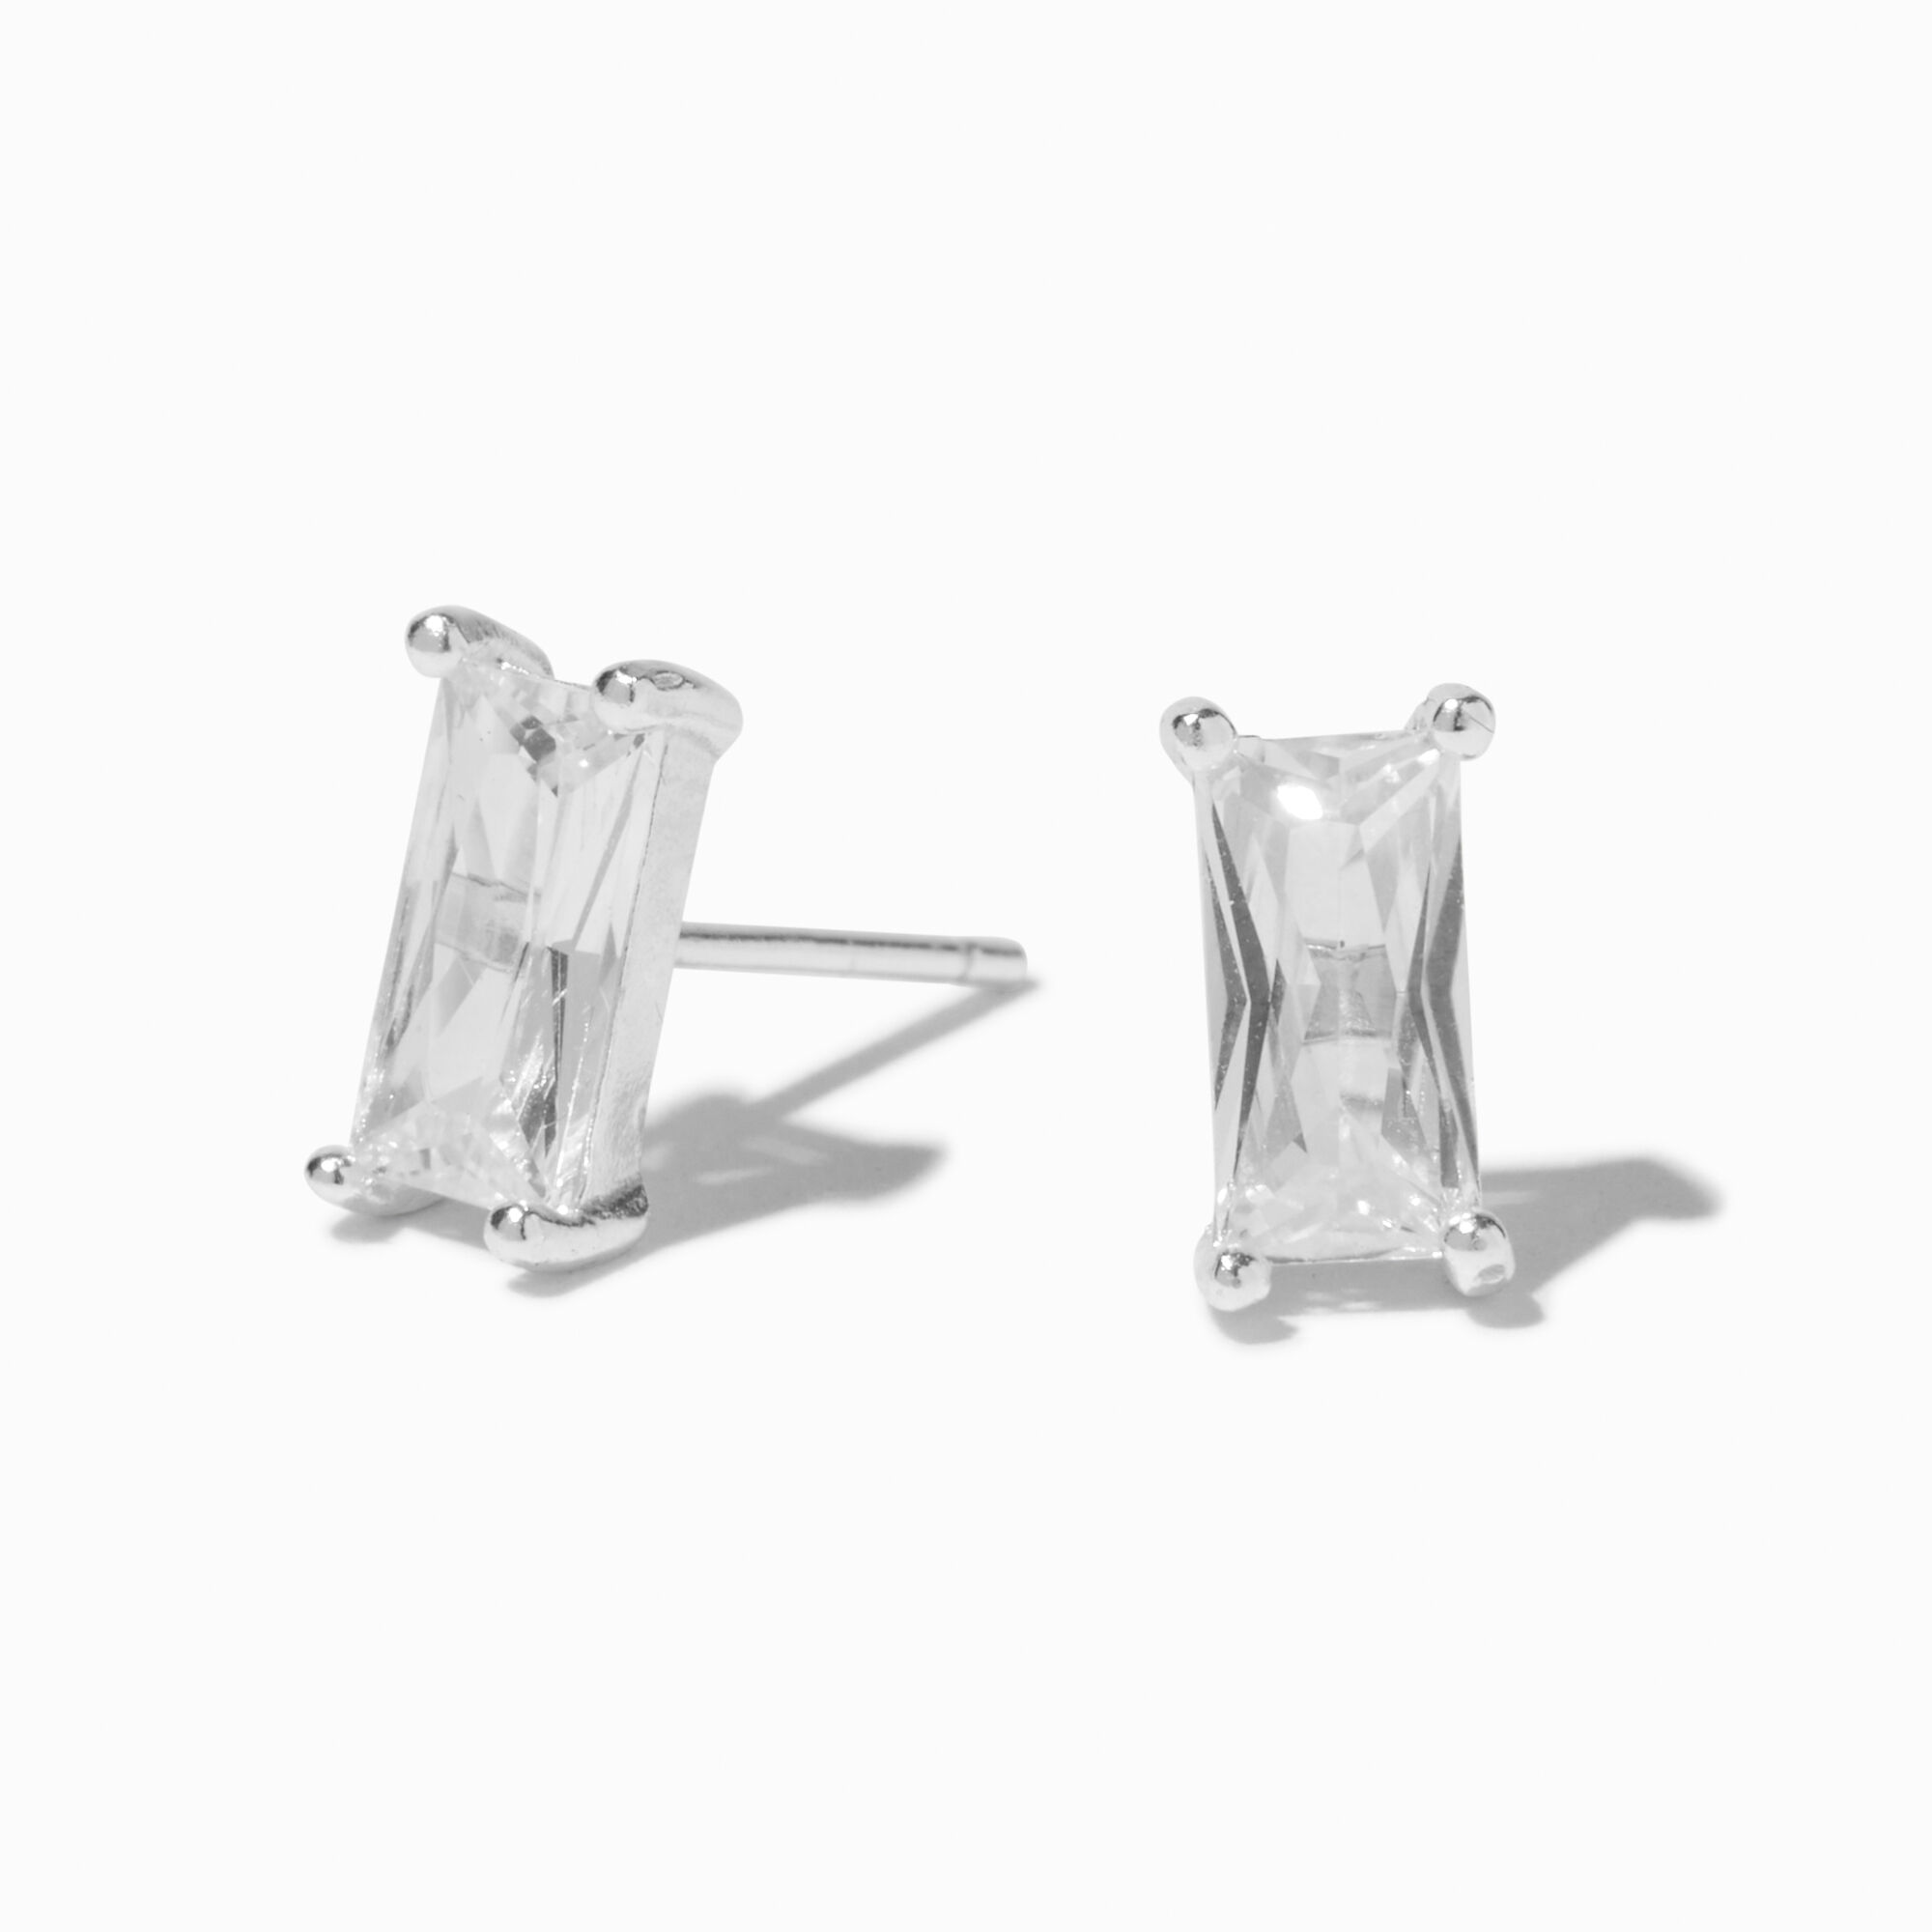 View Claires Cubic Zirconia 4X8MM Baguette Stud Earrings Silver information